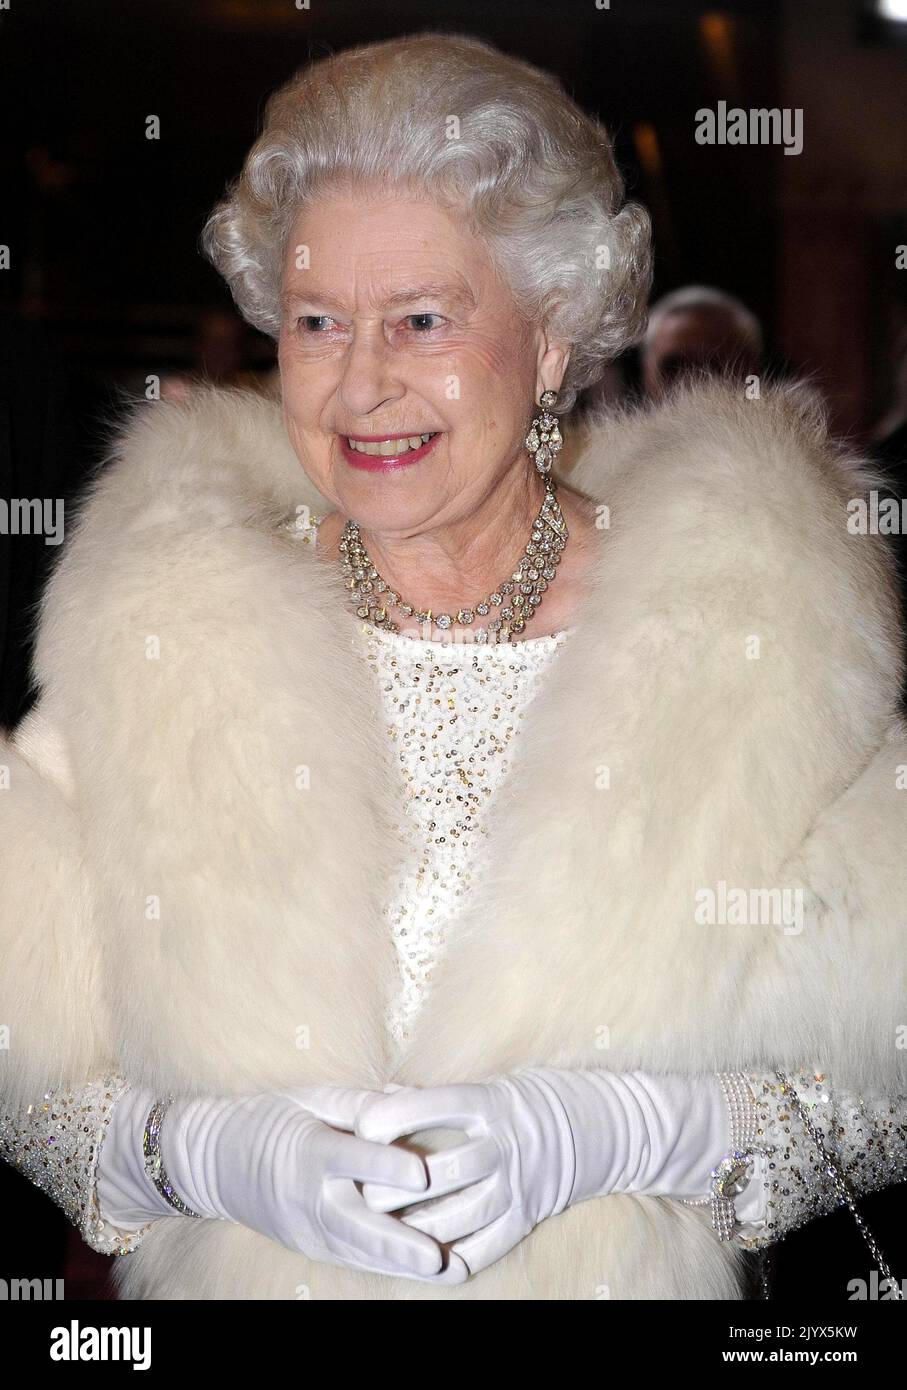 File photo dated 03/12/2007 of Queen Elizabeth II arriving for the 2007 Royal Variety Performance at the Empire Theatre, Liverpool. The Queen died peacefully at Balmoral this afternoon, Buckingham Palace has announced. Issue date: Thursday September 8, 2022. Stock Photo